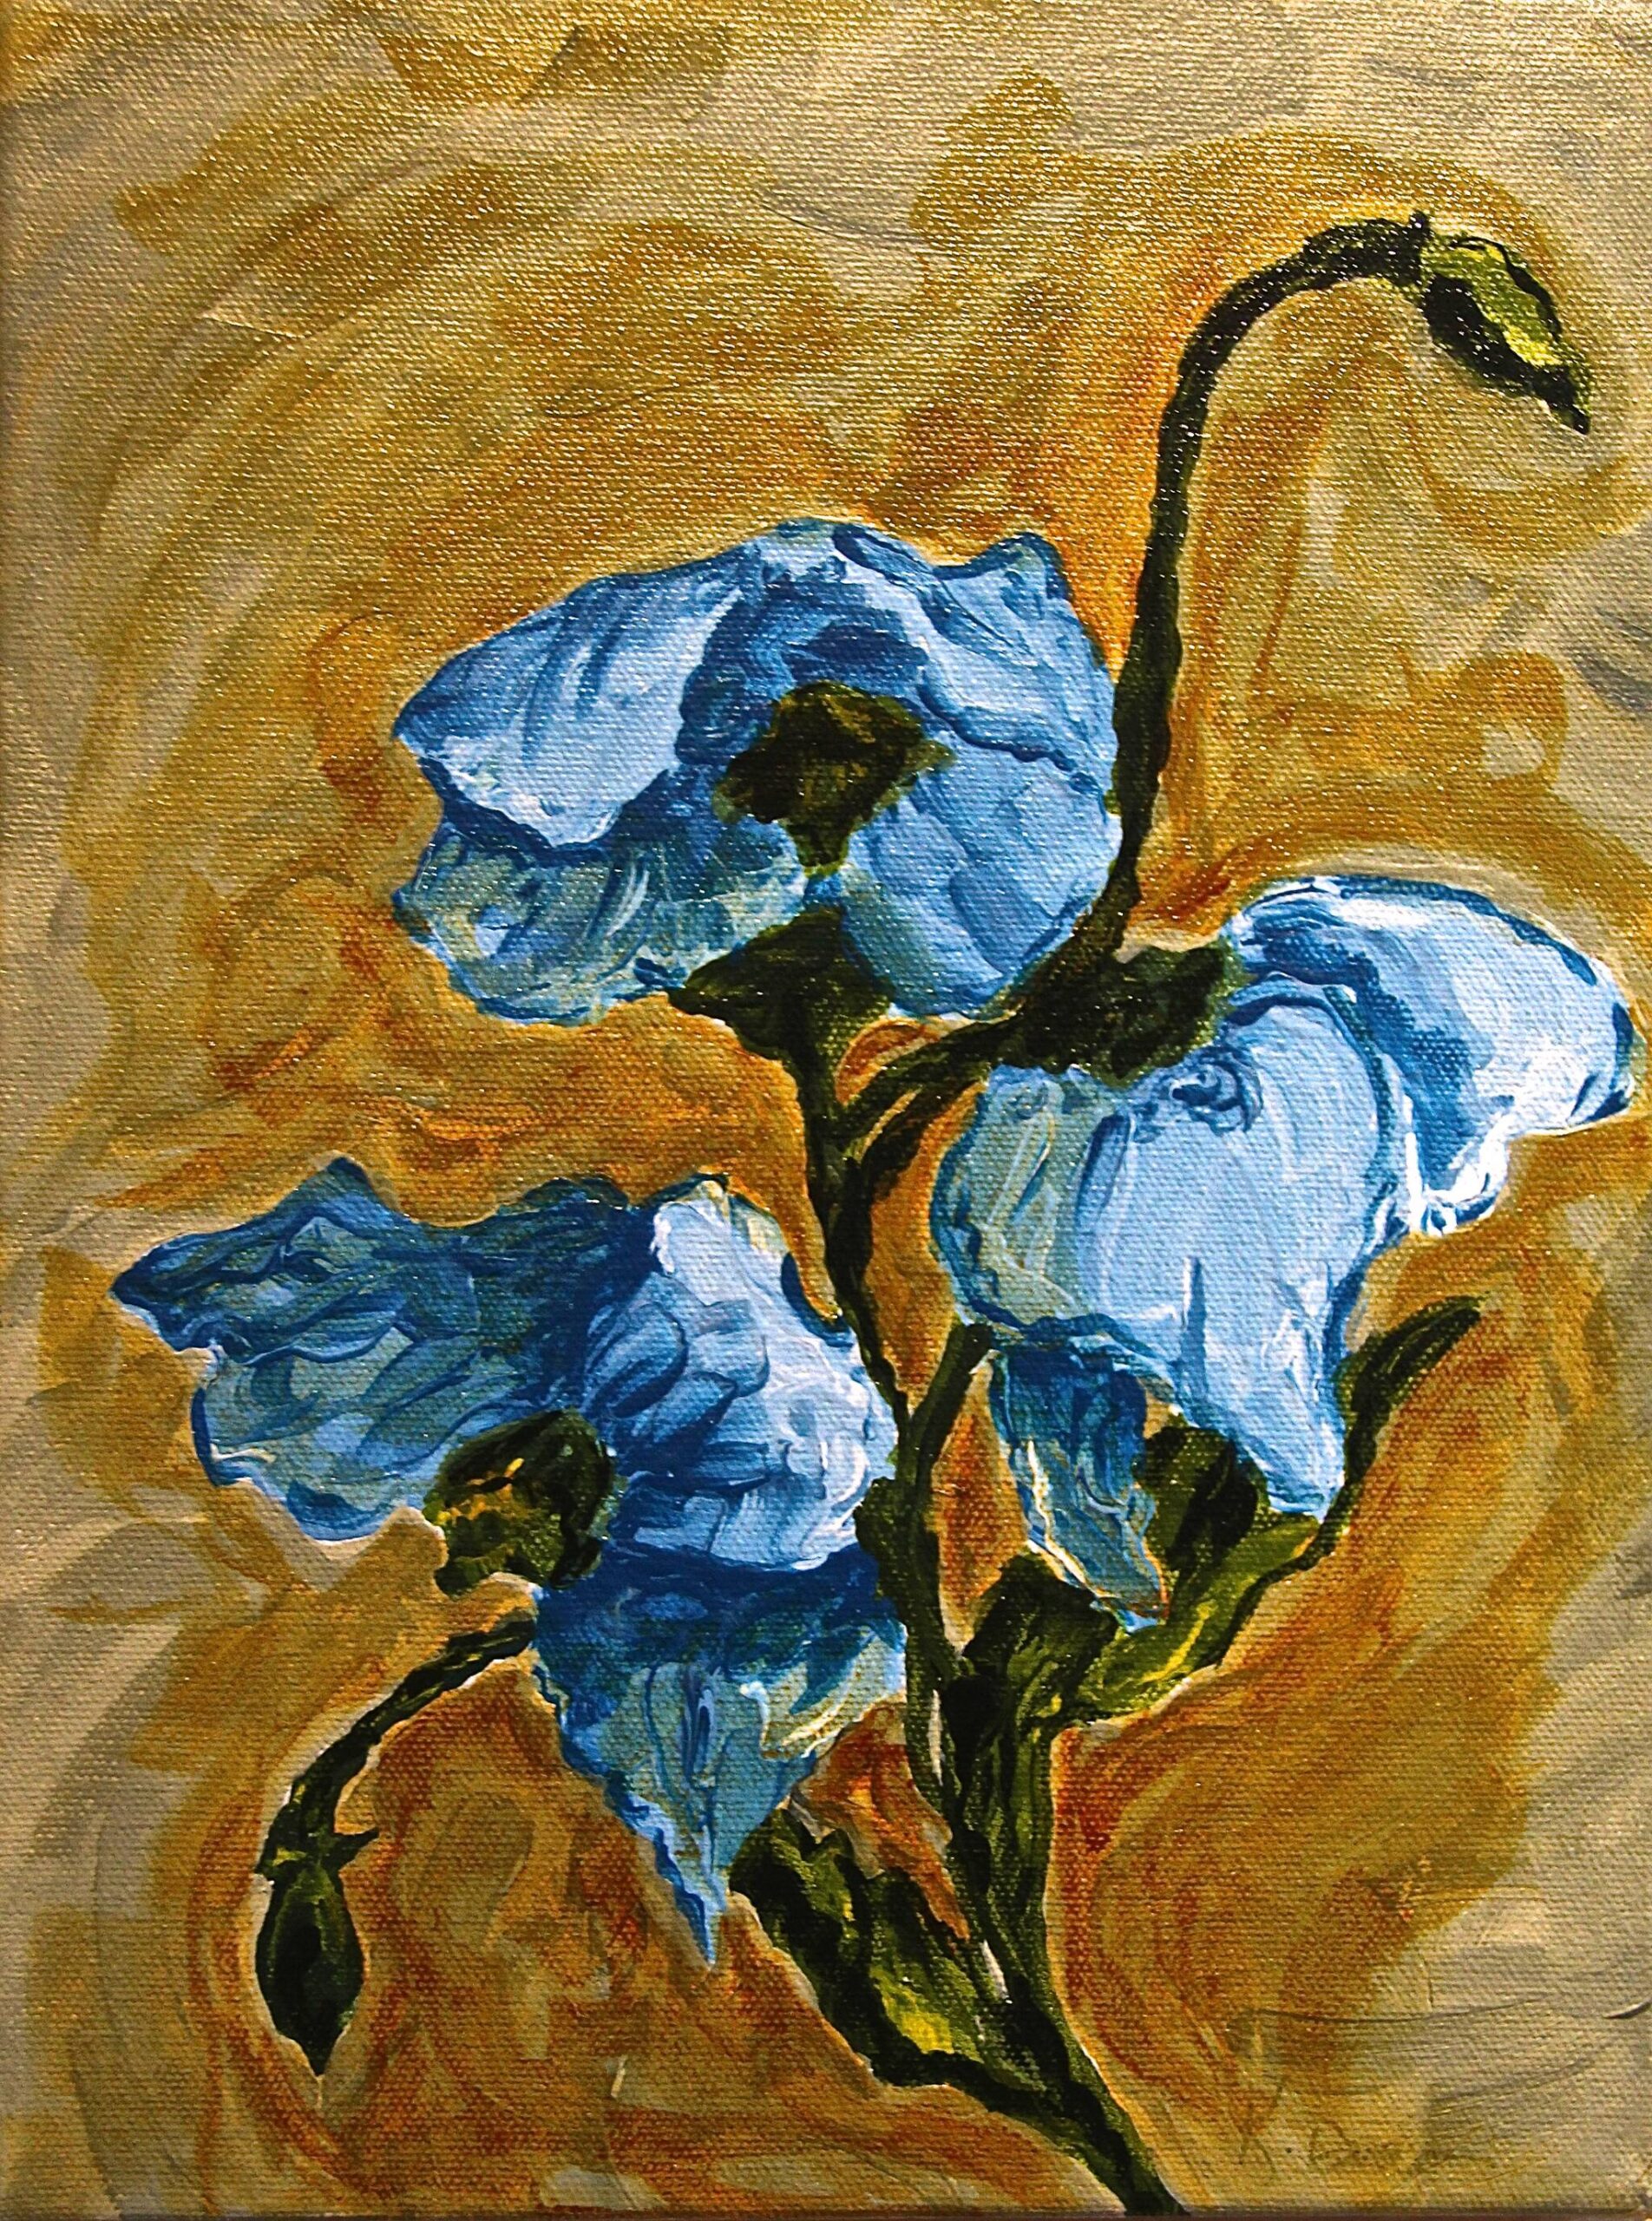 Photo provided by Ptarmigan Arts
“Poppies” by Kathi Drew, on display at Ptarmigan Arts.